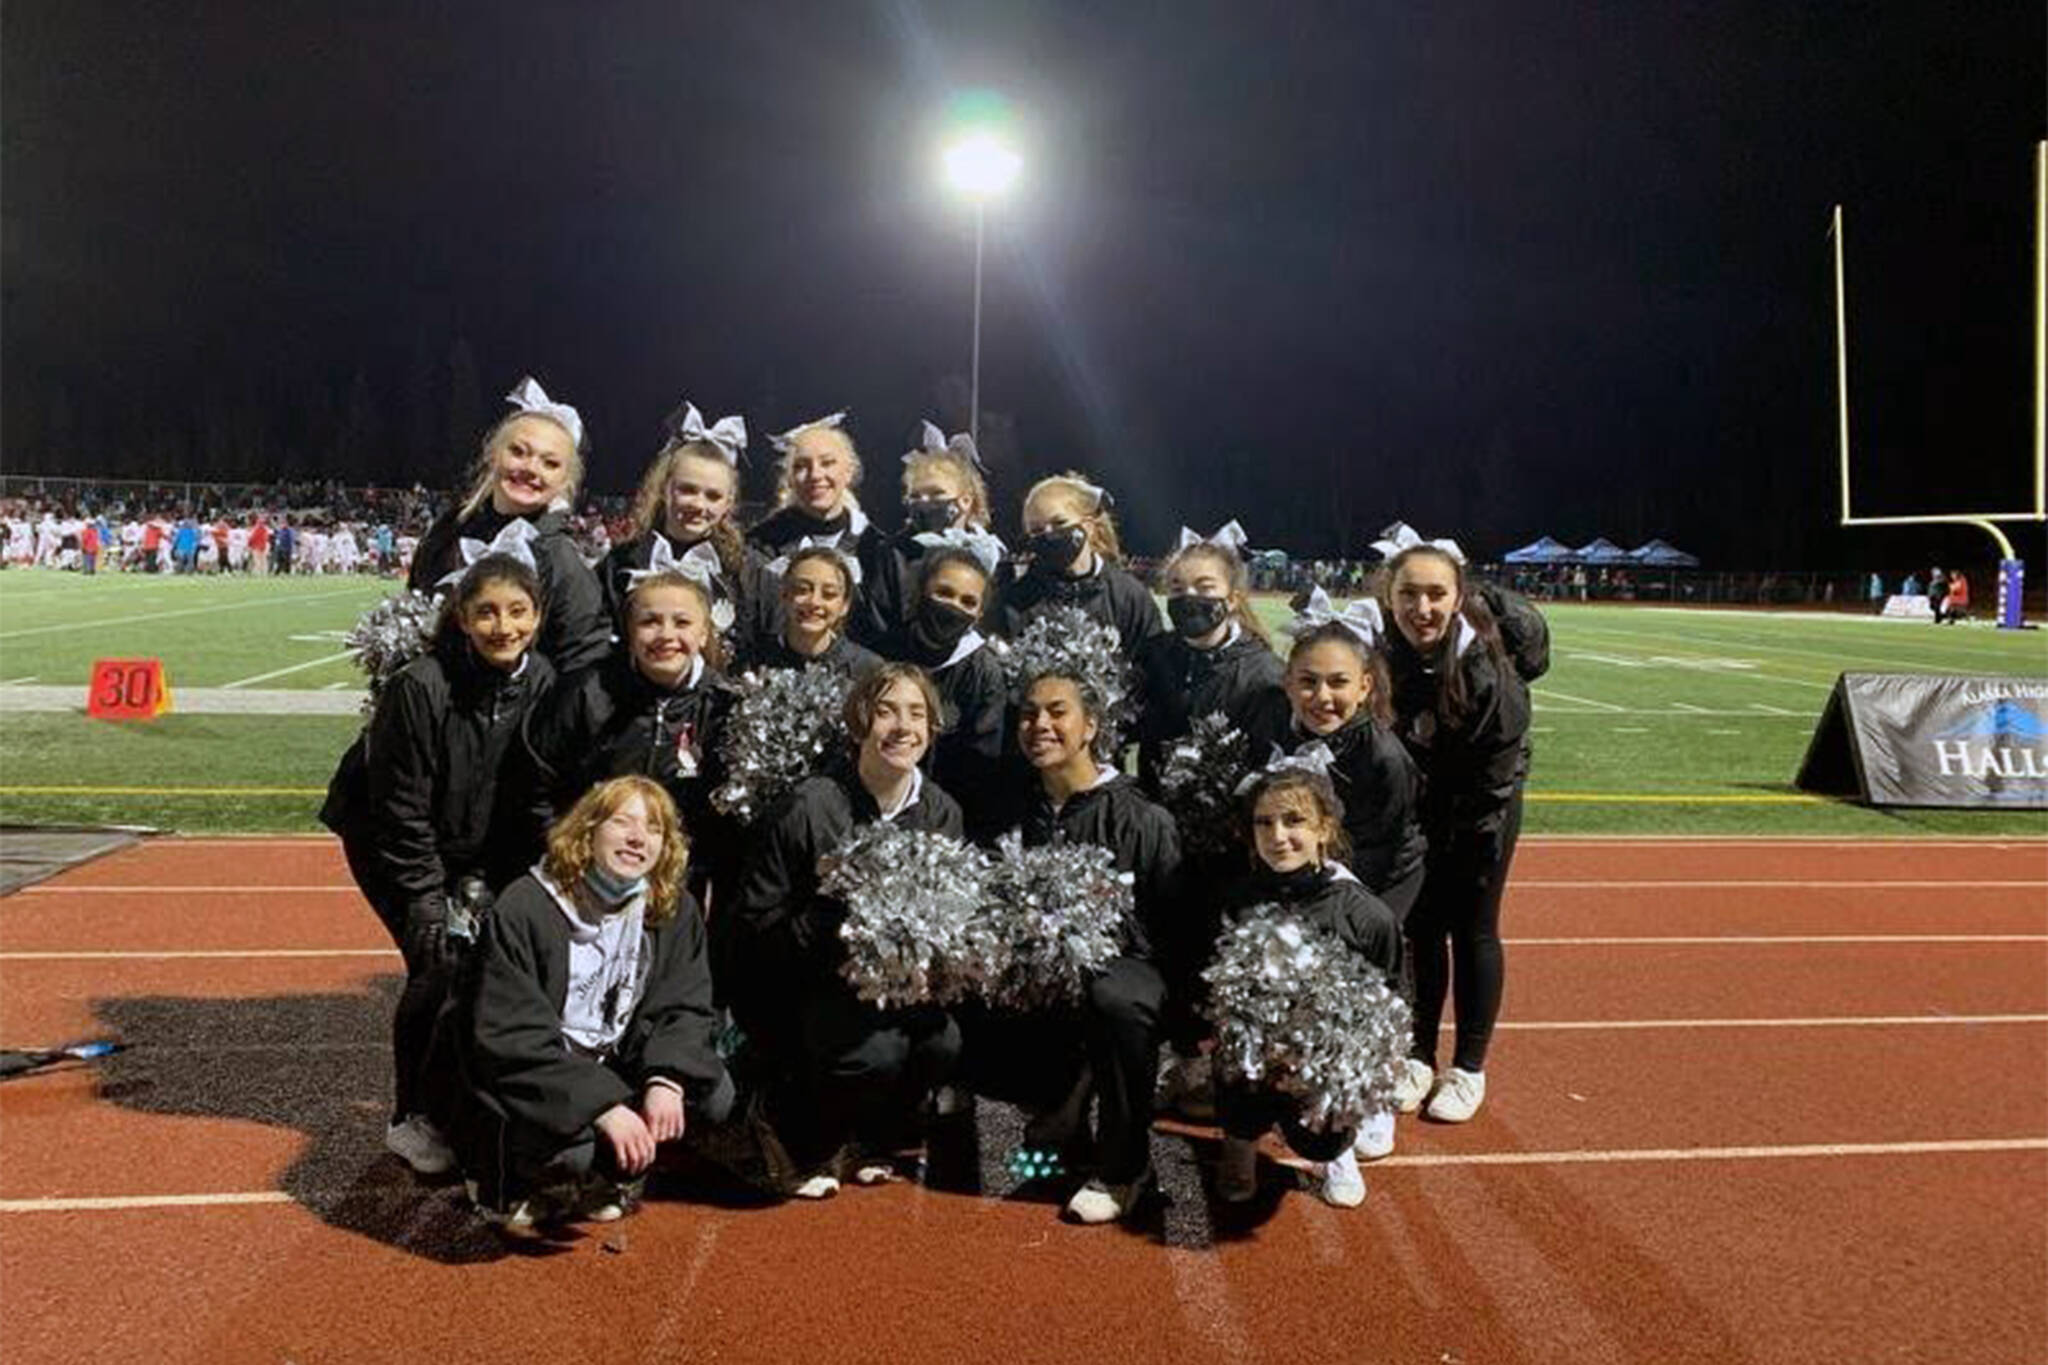 Juneau’s unified football cheerleaders supported the football team Friday night in Anchorage and picked up a slew of awards, including “Grand Master Champs” at Saturday’s “Rally in the Valley” cheer competition at Colony High School in Palmer. (Courtesy photo/Carlene Nore)